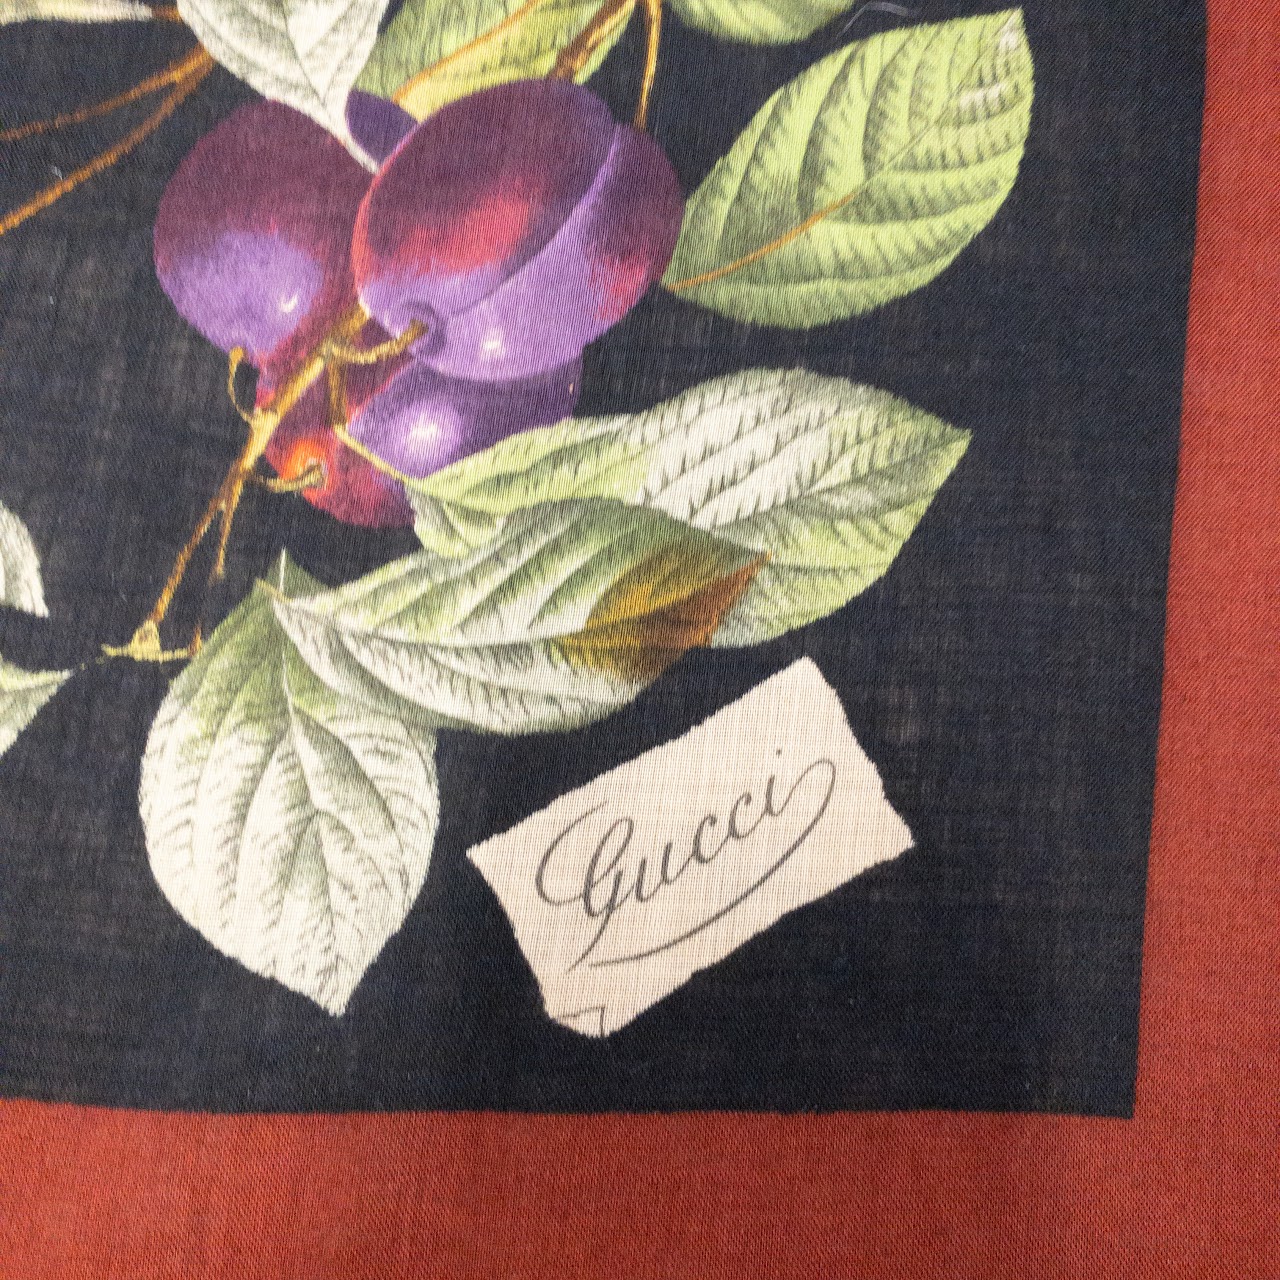 Gucci Vintage Floral and Fruit Wool Scarf/Shawl